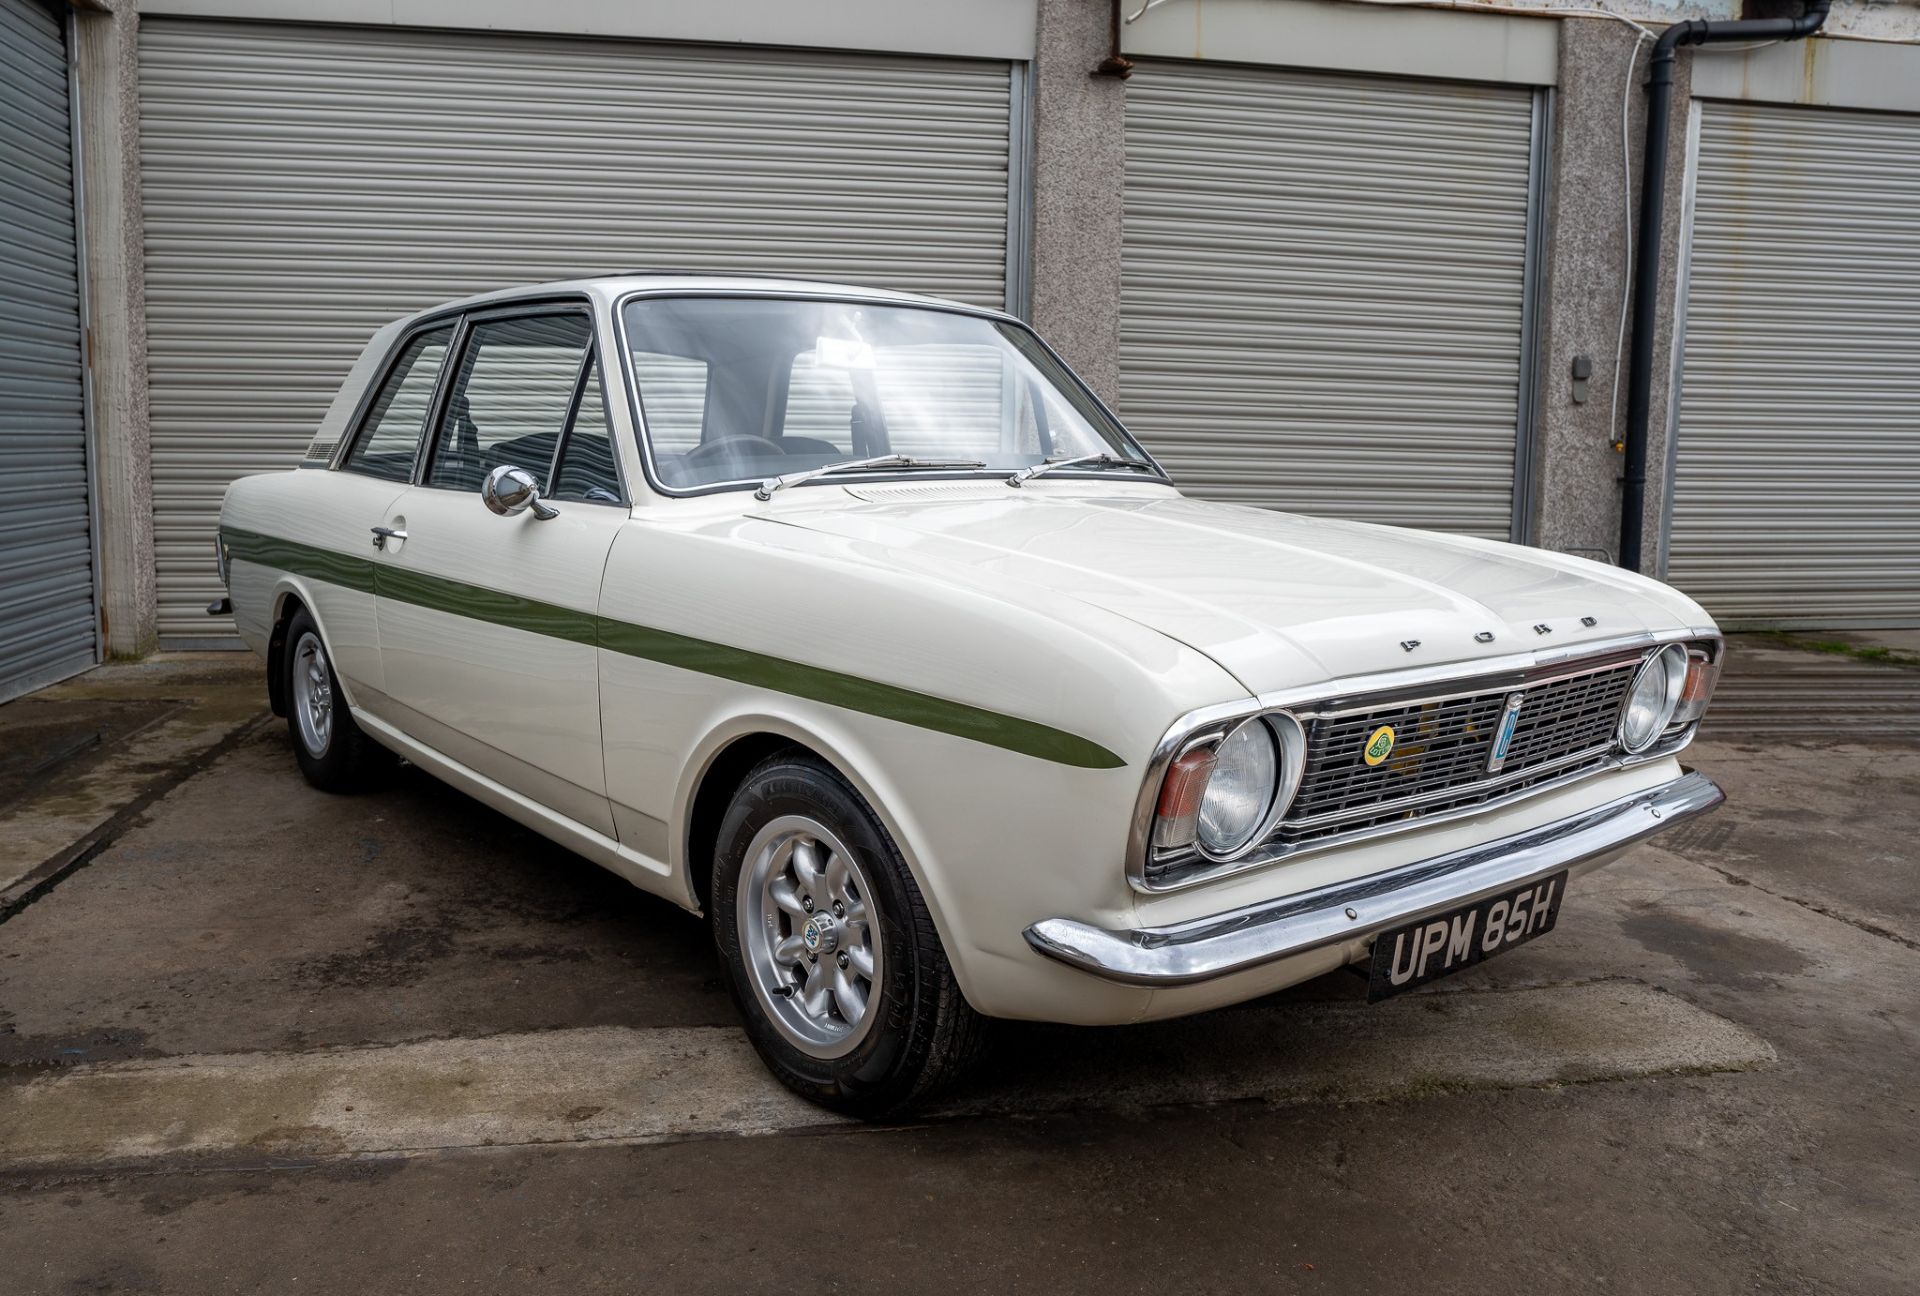 1970 FORD CORTINA LOTUS Chassis Number: BA91HS25847 Registration Number: UPM 85H - Ex-East Sussex